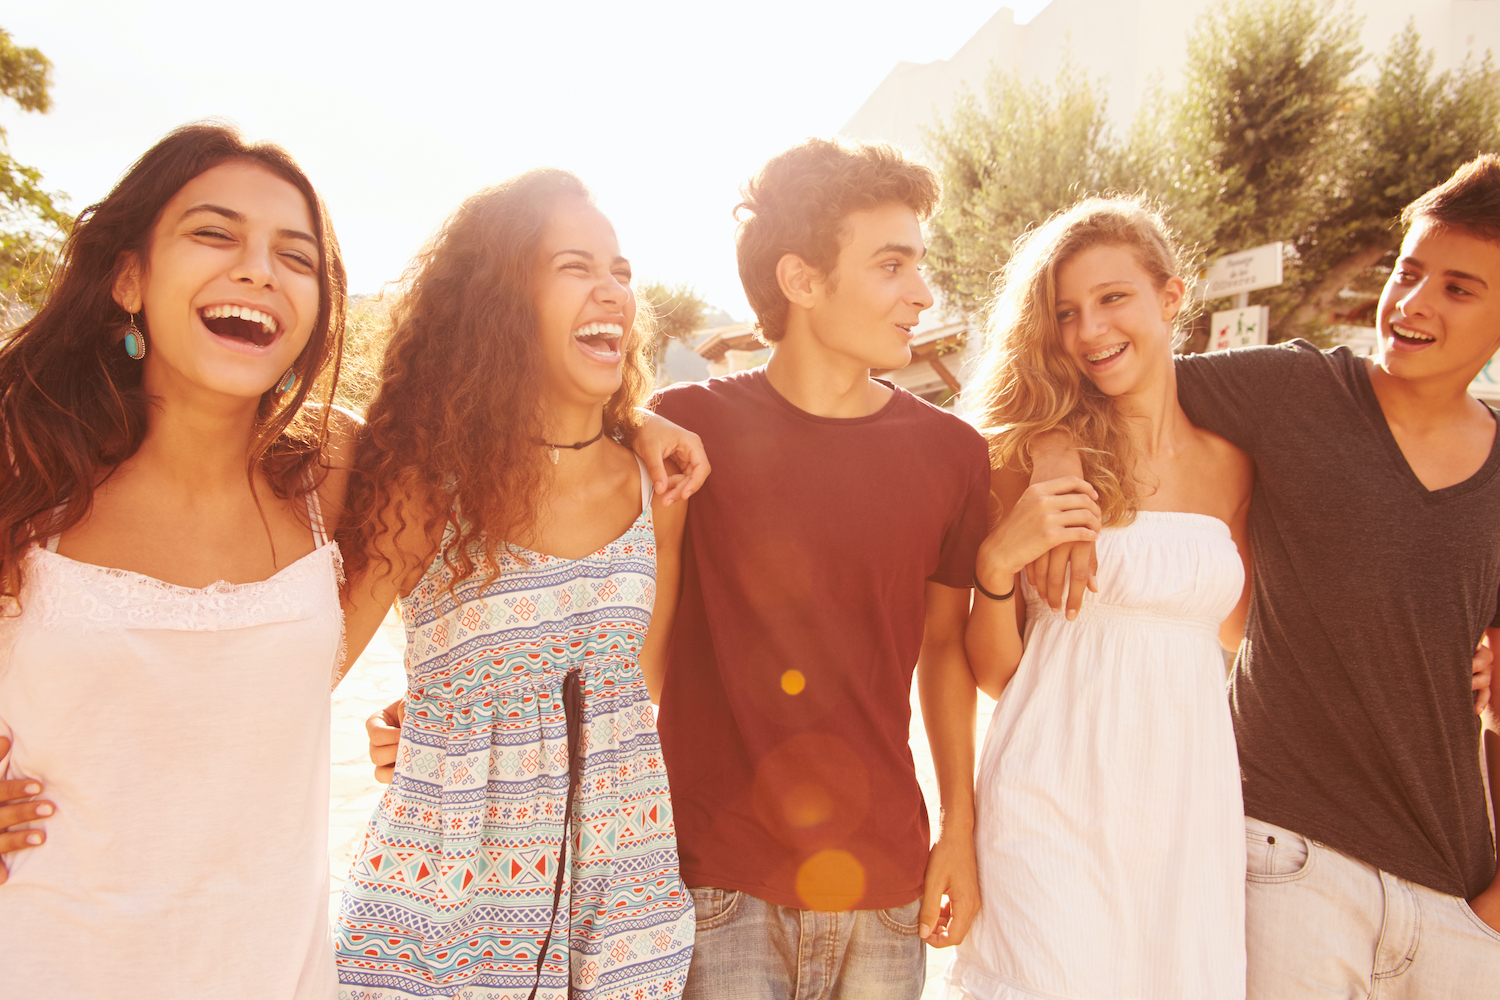 A group of teens smile as they walk together outside